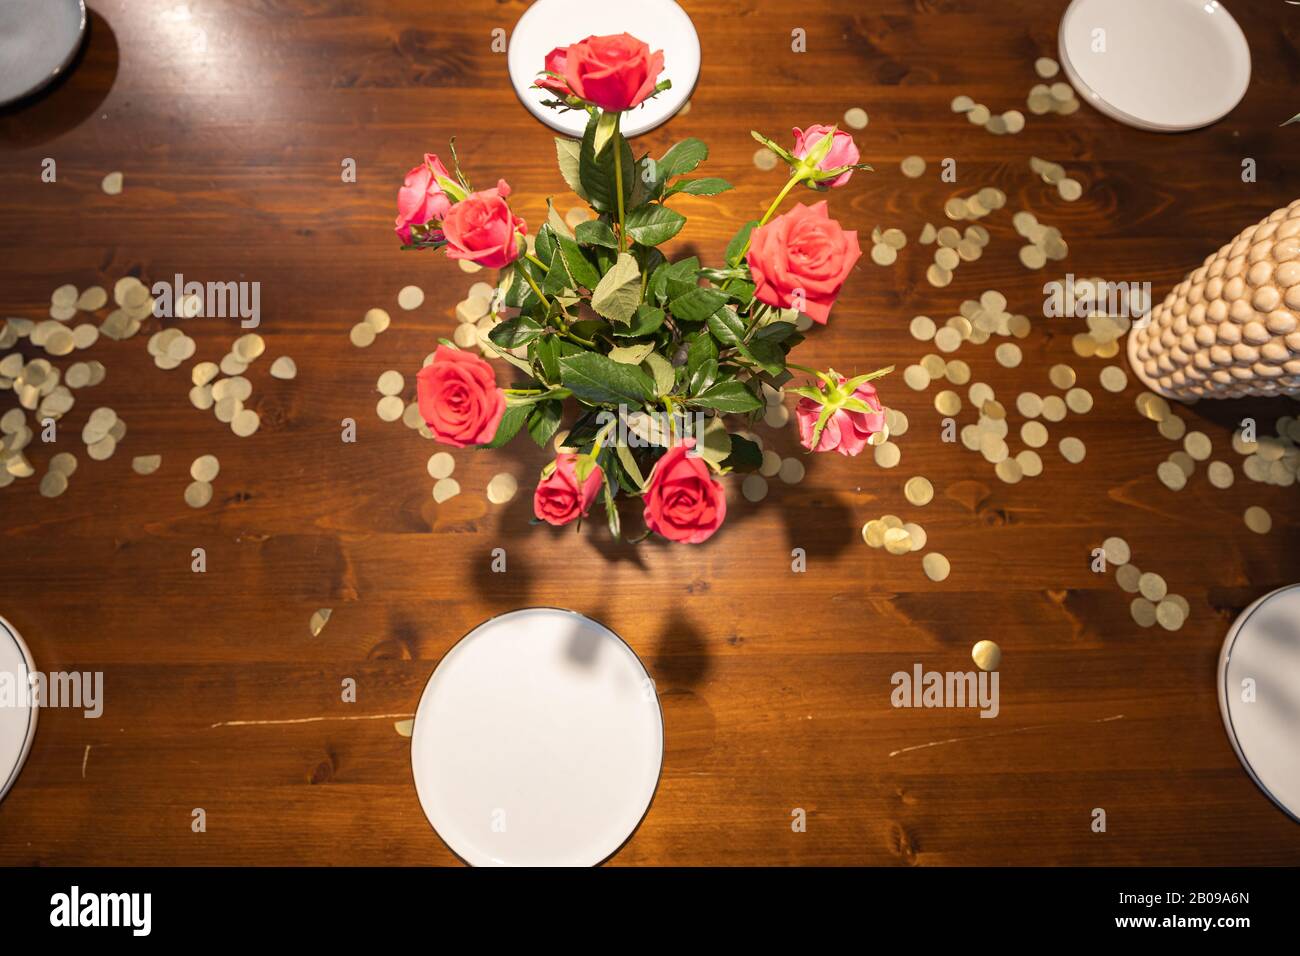 Top down view of a Vase with red roses on a table with gold confetti and plates for dinner. Stock Photo